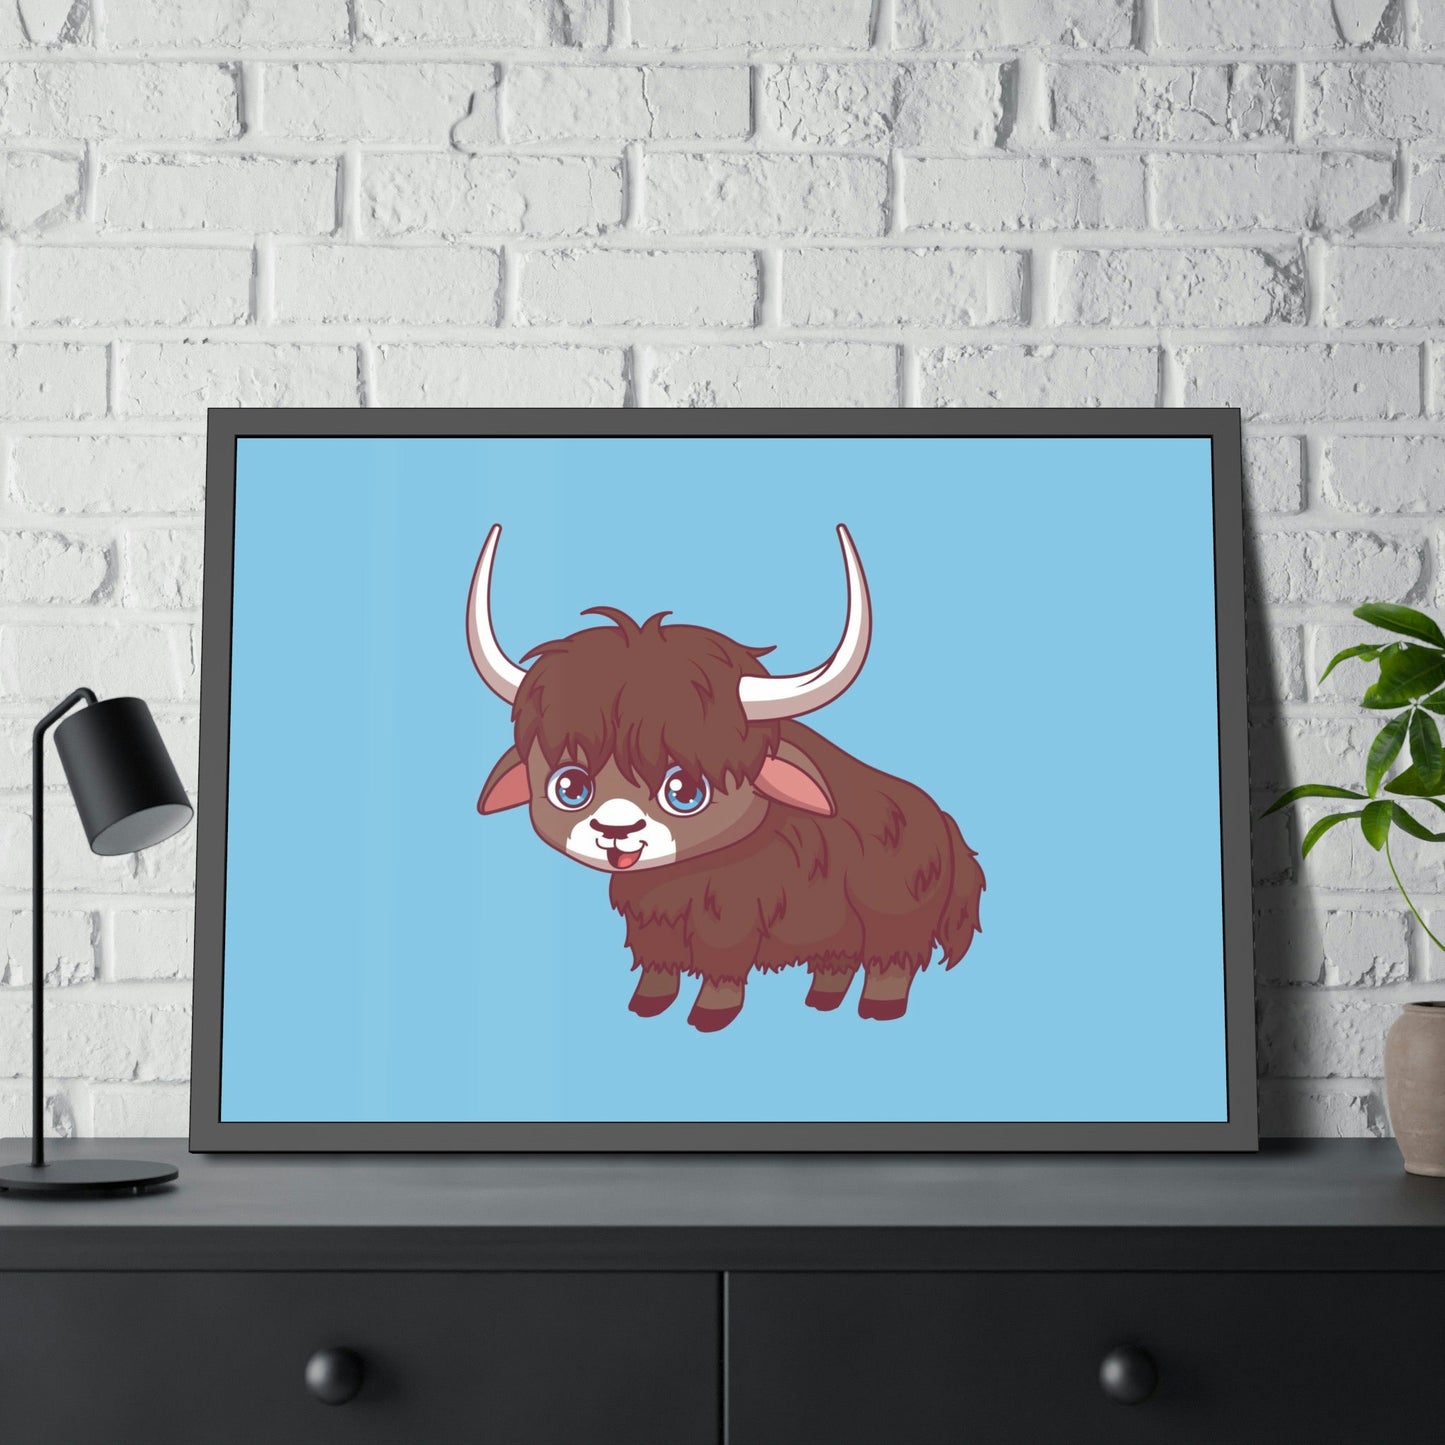 Adorable Bovine: Framed Poster Wall Art Featuring a Sweet Cow Portrait for Kids' Room Decor